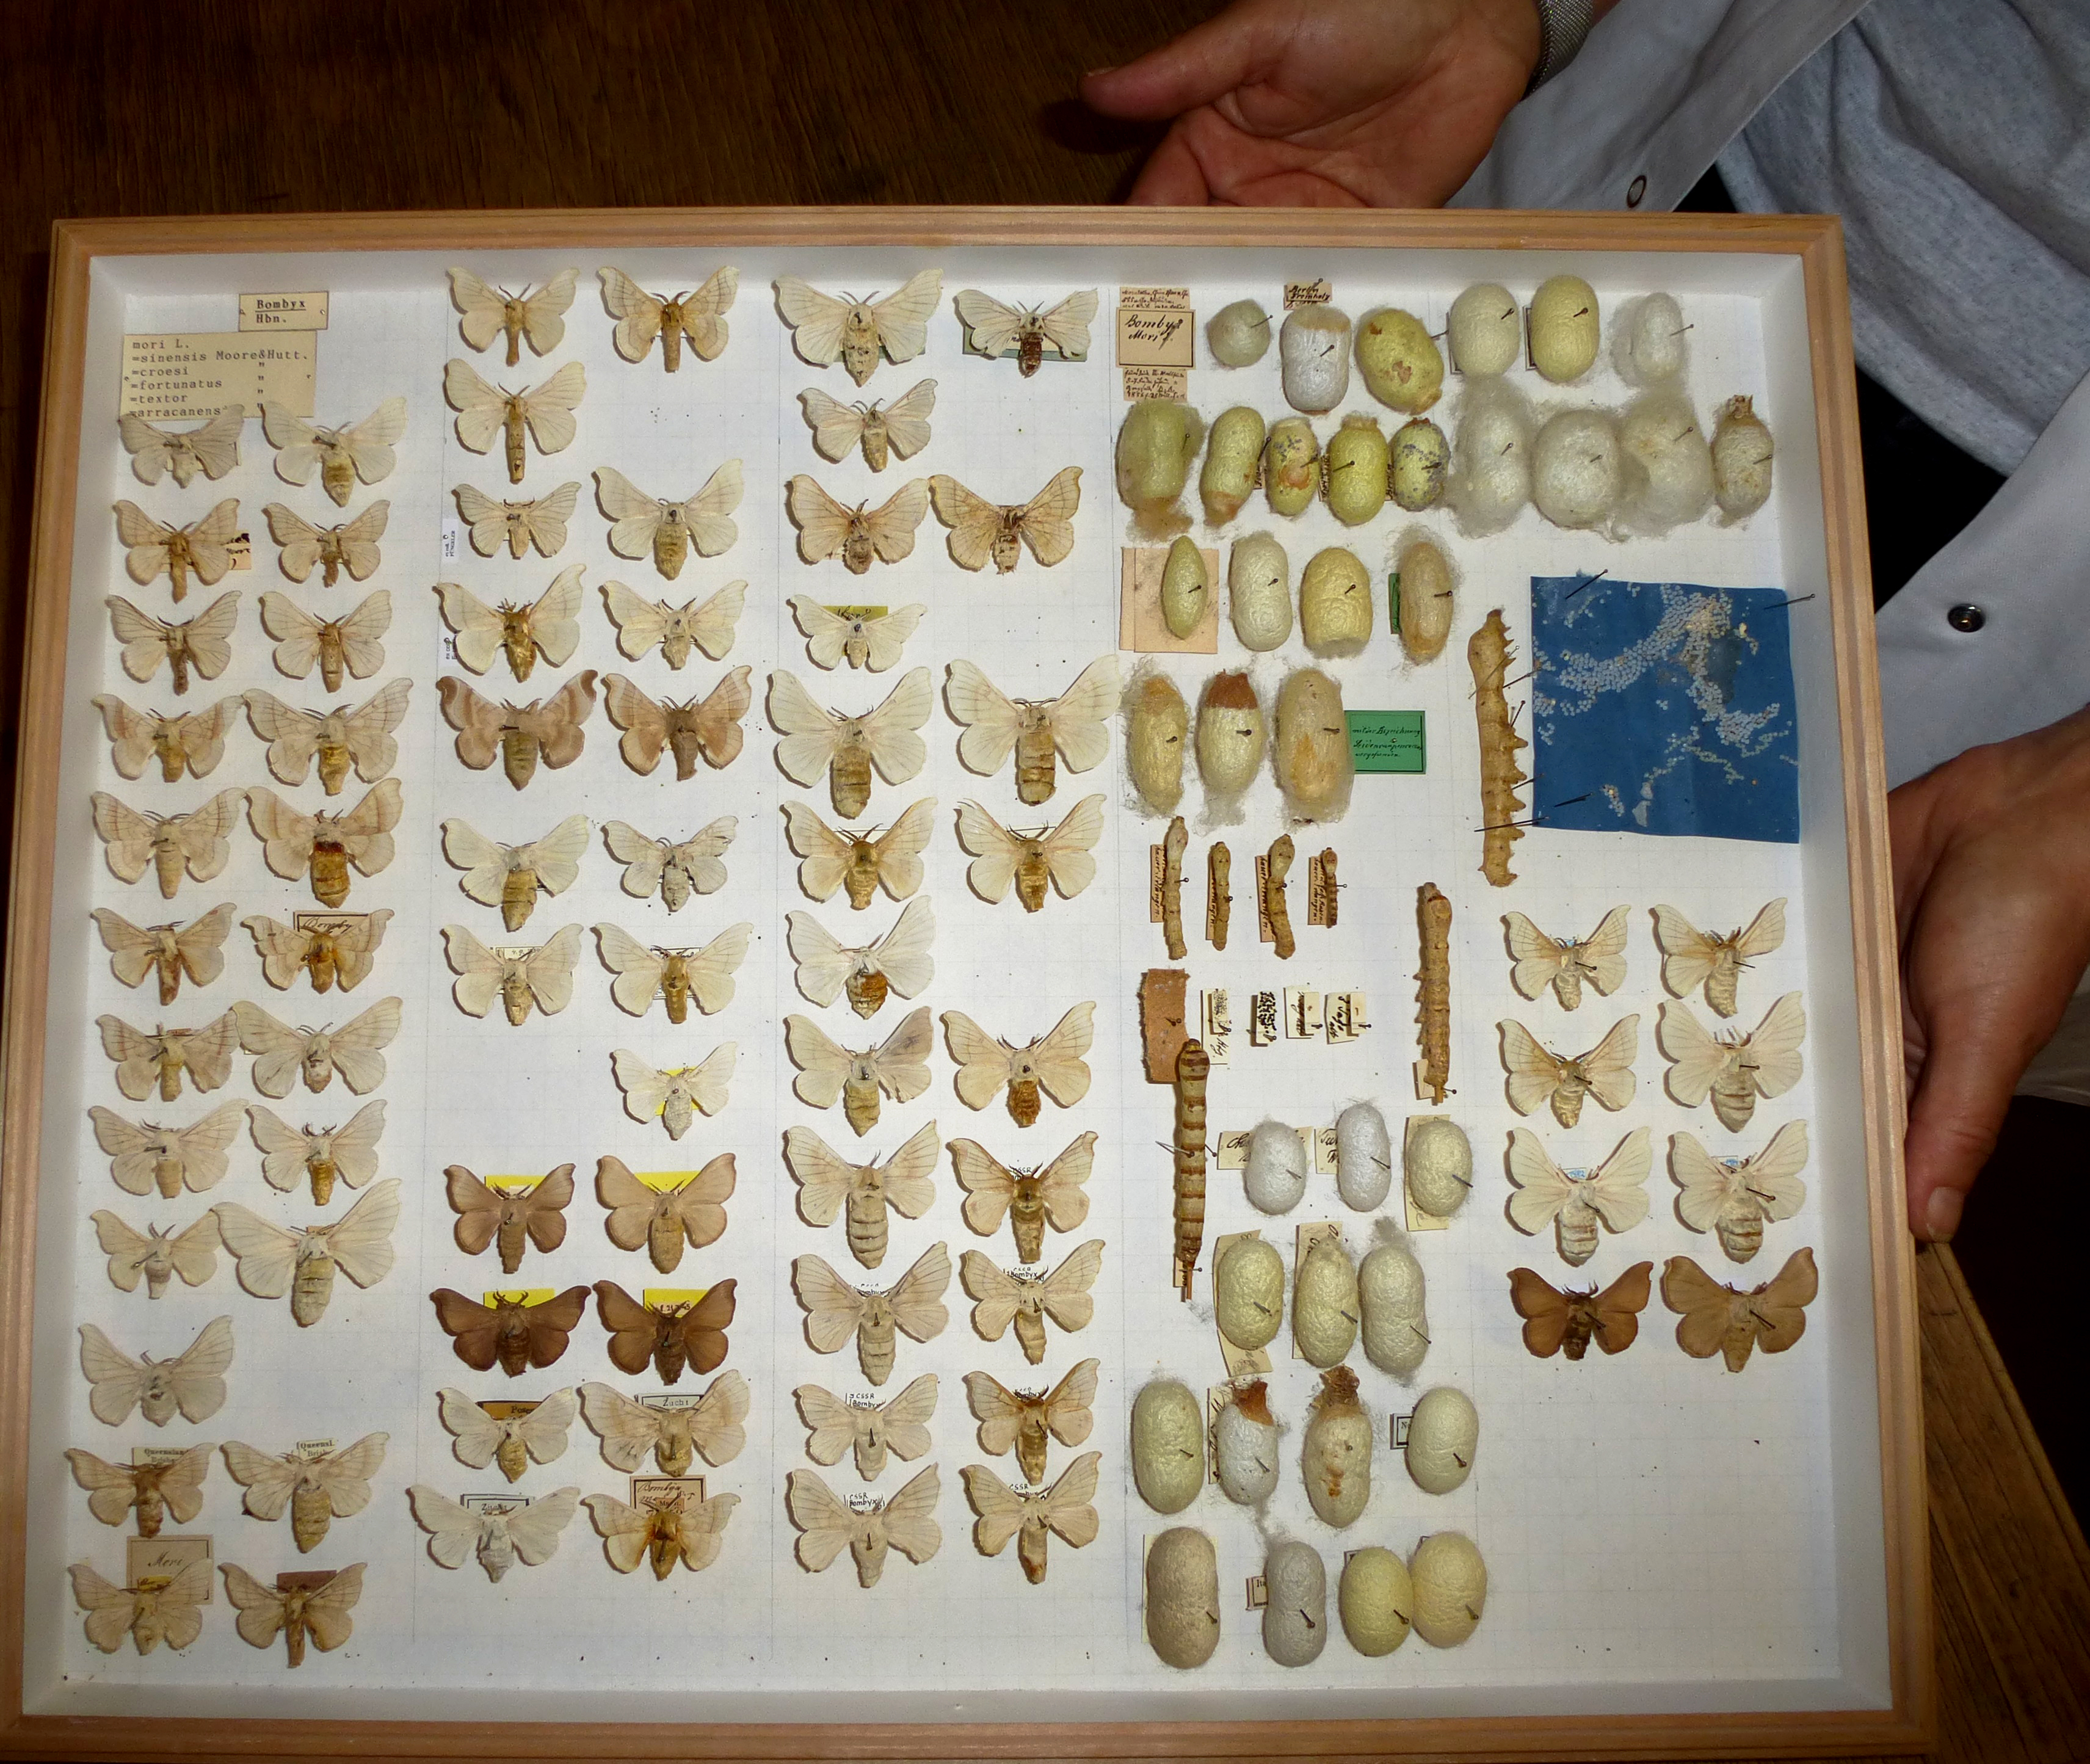 A shallow display case with a wooden frame and a white background. Left-hand side: 66 moths in various shades of beige and brown. Right-hand side: numerous eggs, caterpillars, pupae, all fixed in place with fine needles. The case is being held by a person wearing a white lab coat.